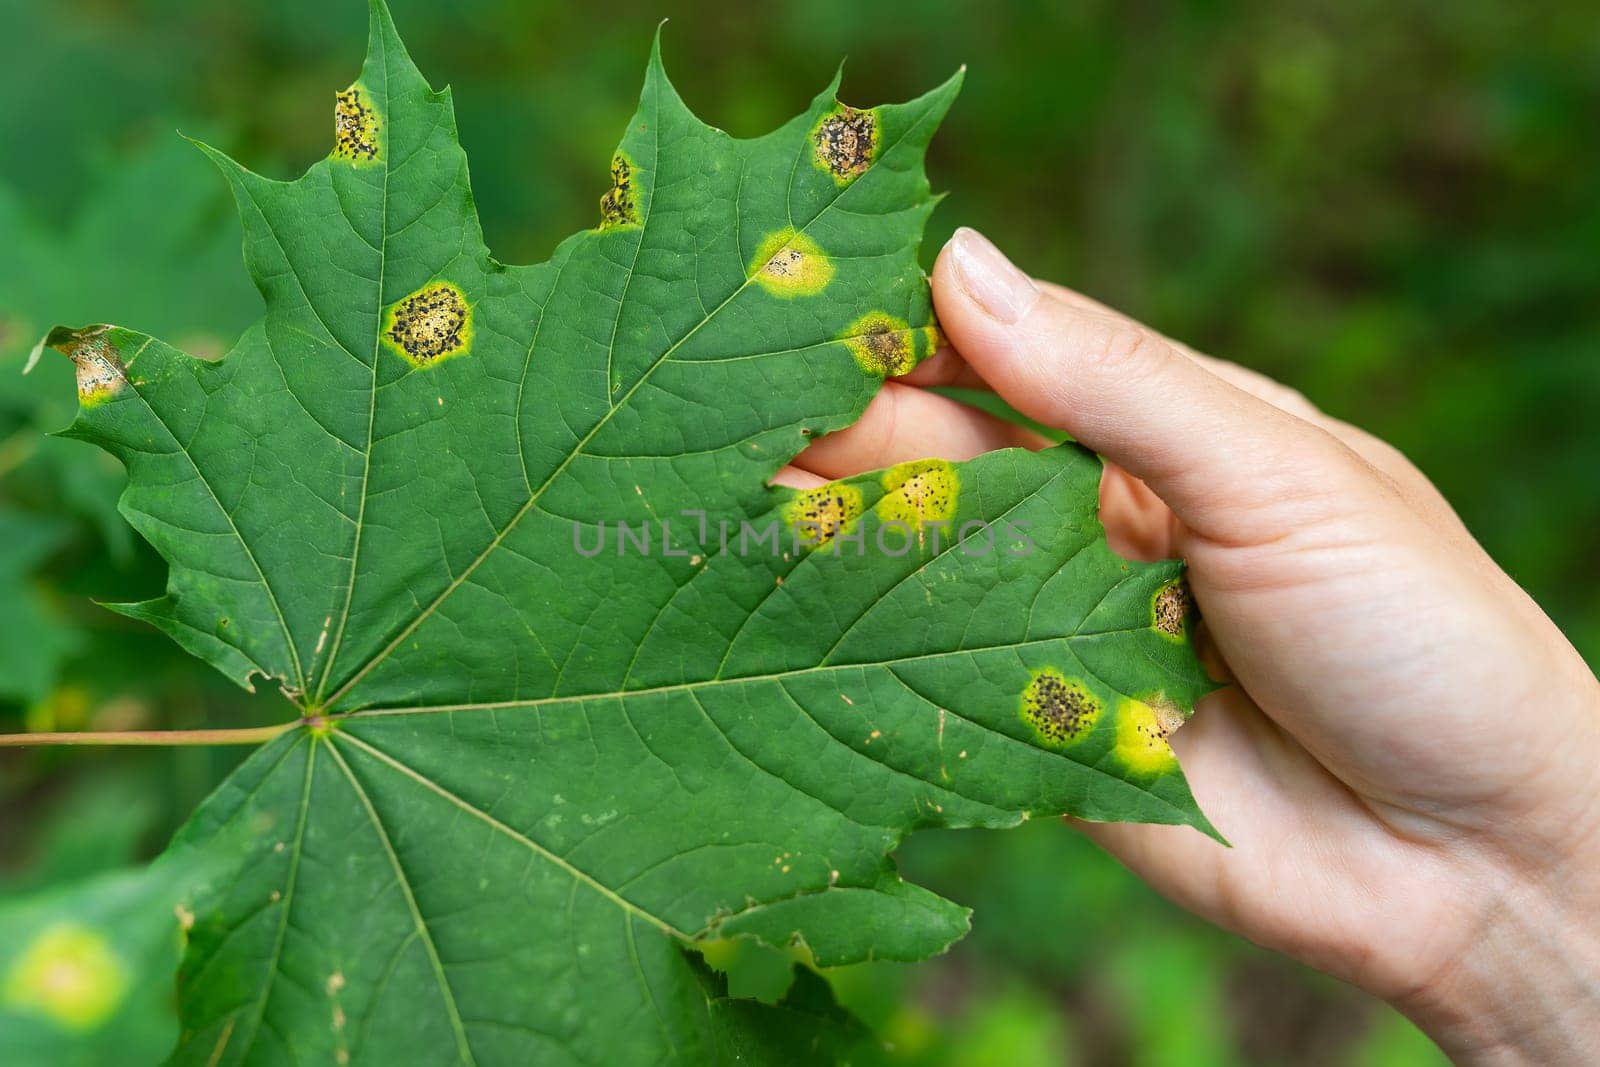 A diseased green maple leaf held by a hand against a blurred nature background